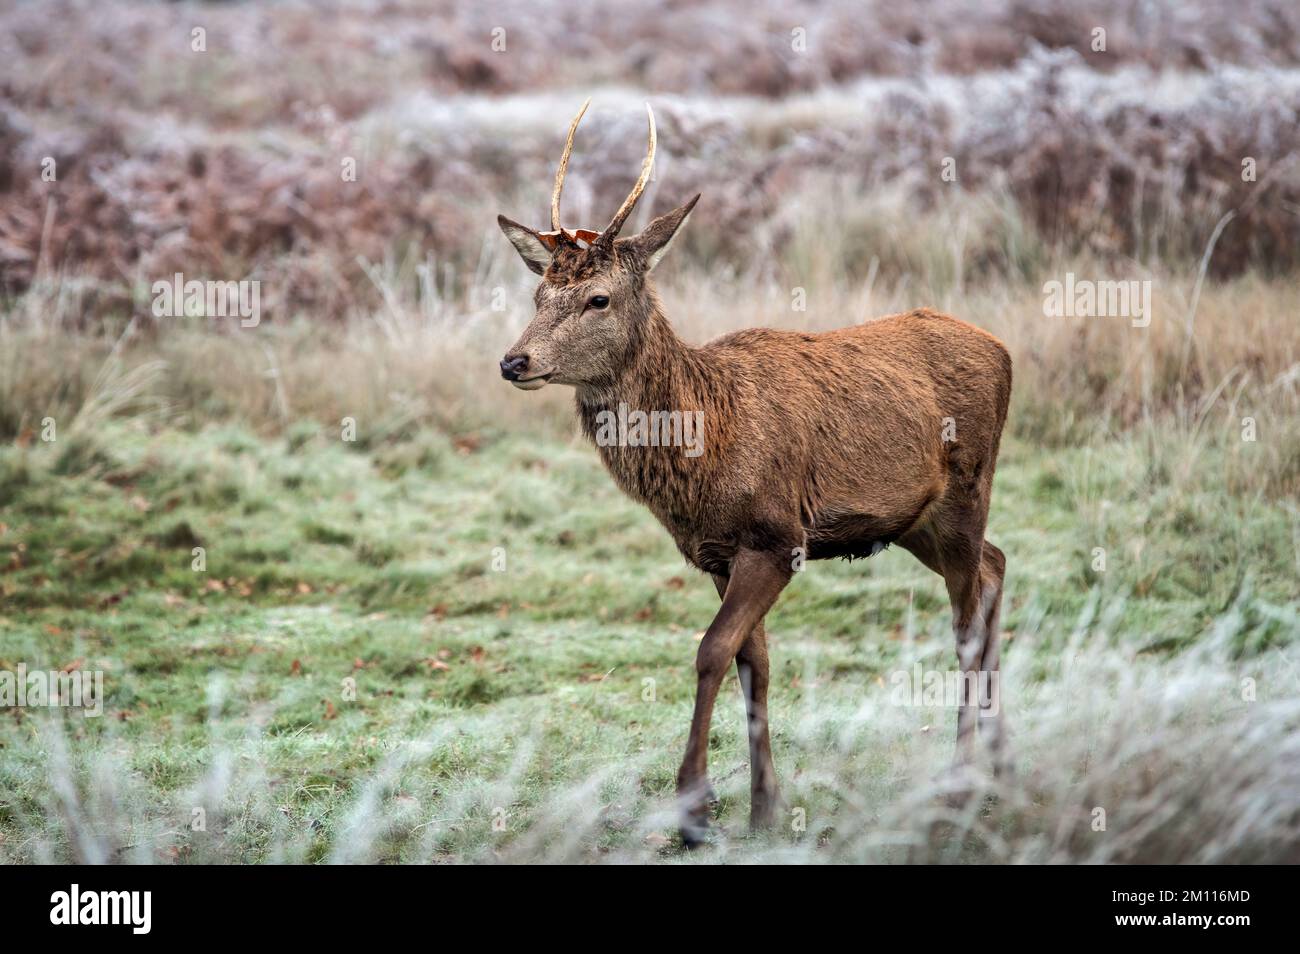 Young stag deer on the move Stock Photo